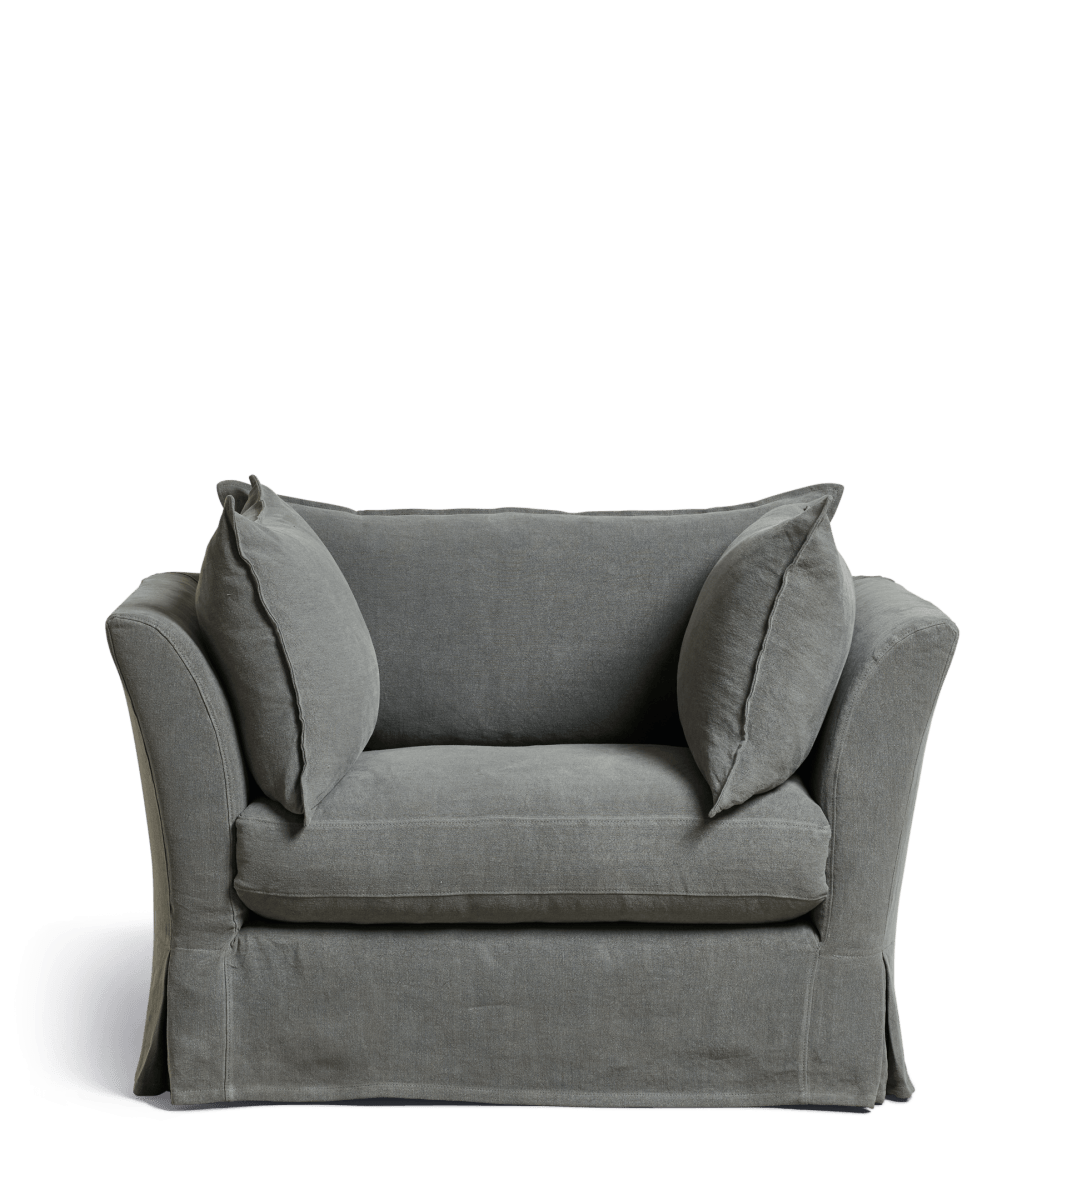 QIHANG-UK Velvet Occasional Chair Grey Tufted Oyster Chair Curved Leisure Chair Fluted Back Fireside Chair Quilted Wooden Lounge Chair Armless Tub Chair Oversized for Living Room Reception Room 